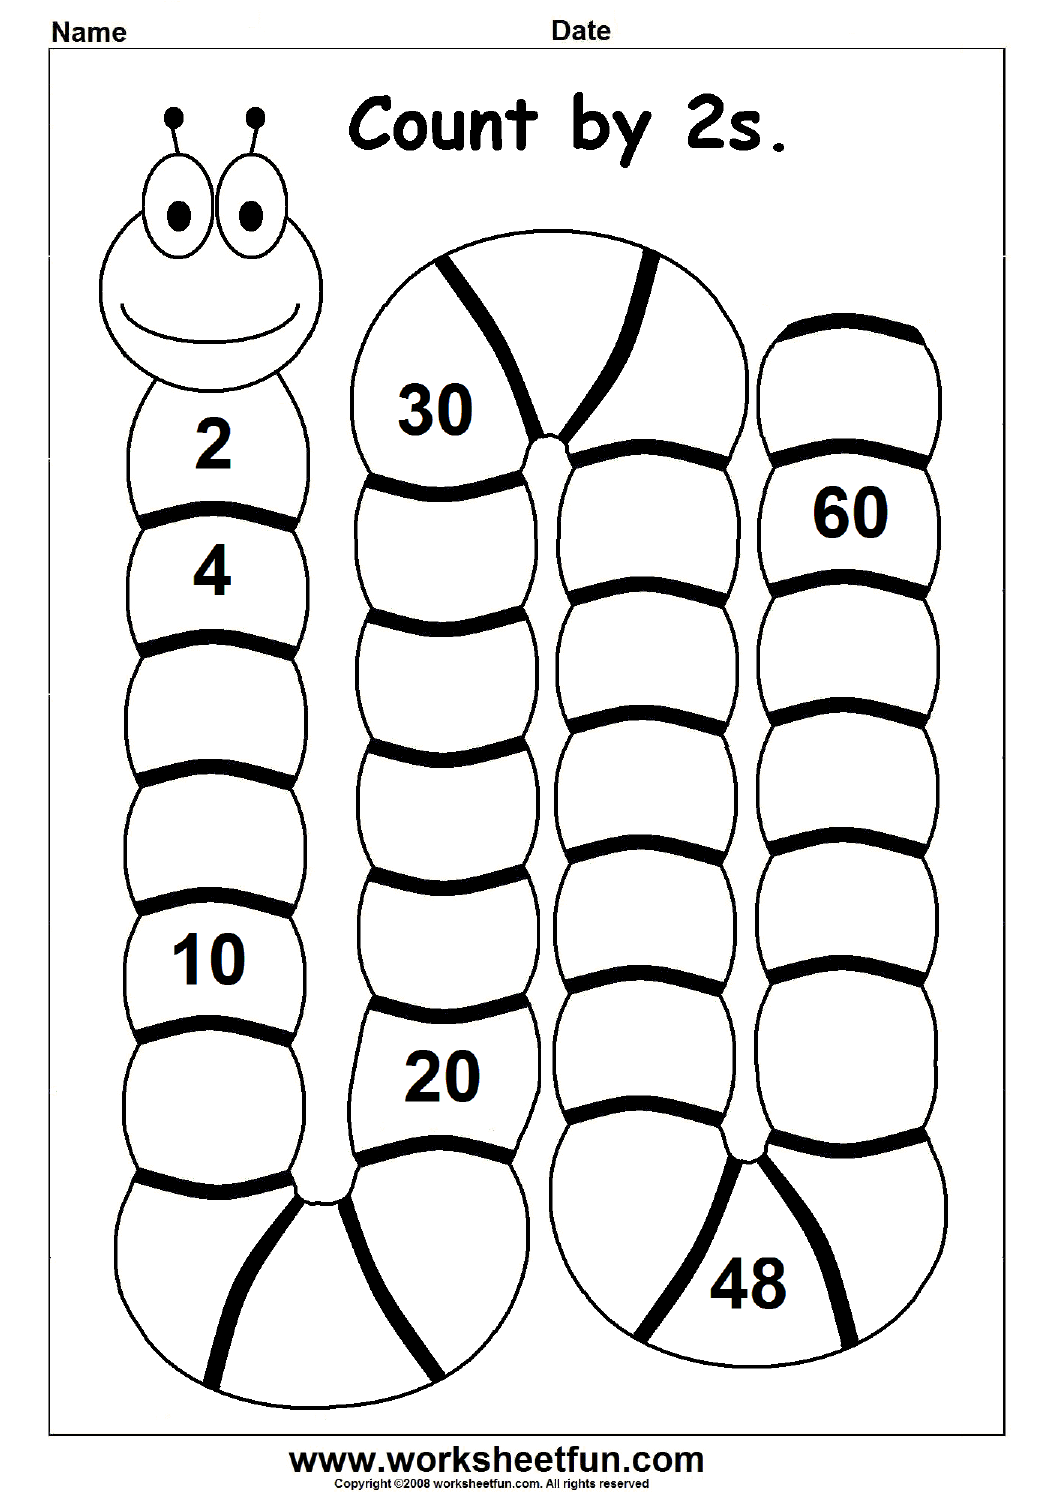 counting-by-2-free-printable-worksheets-printable-templates